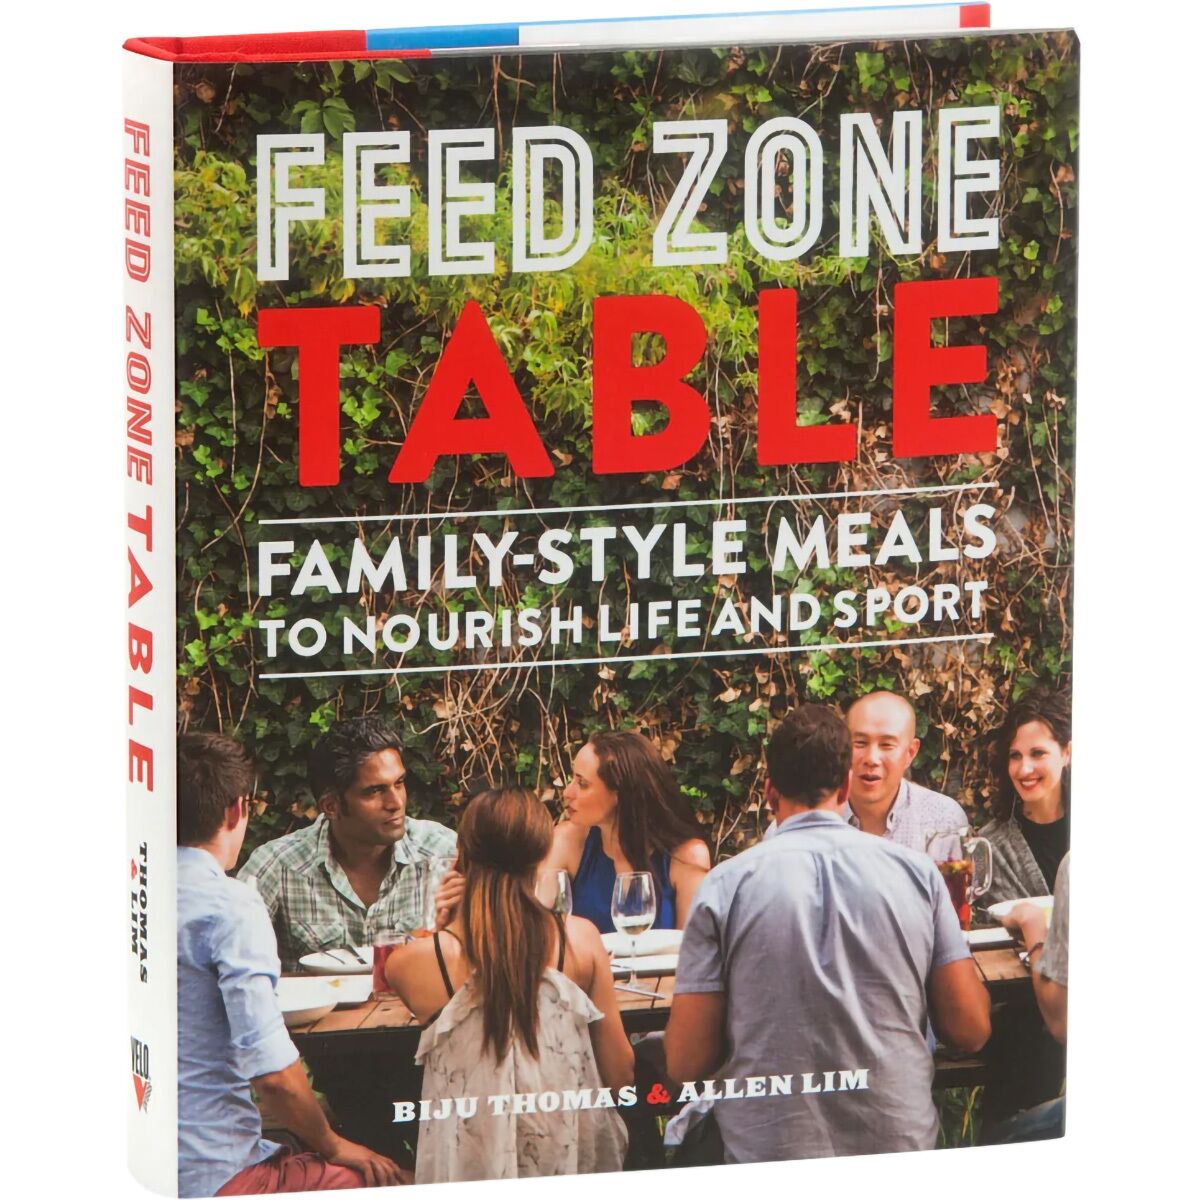 Skratch Labs The Feed Zone Table Cook Book